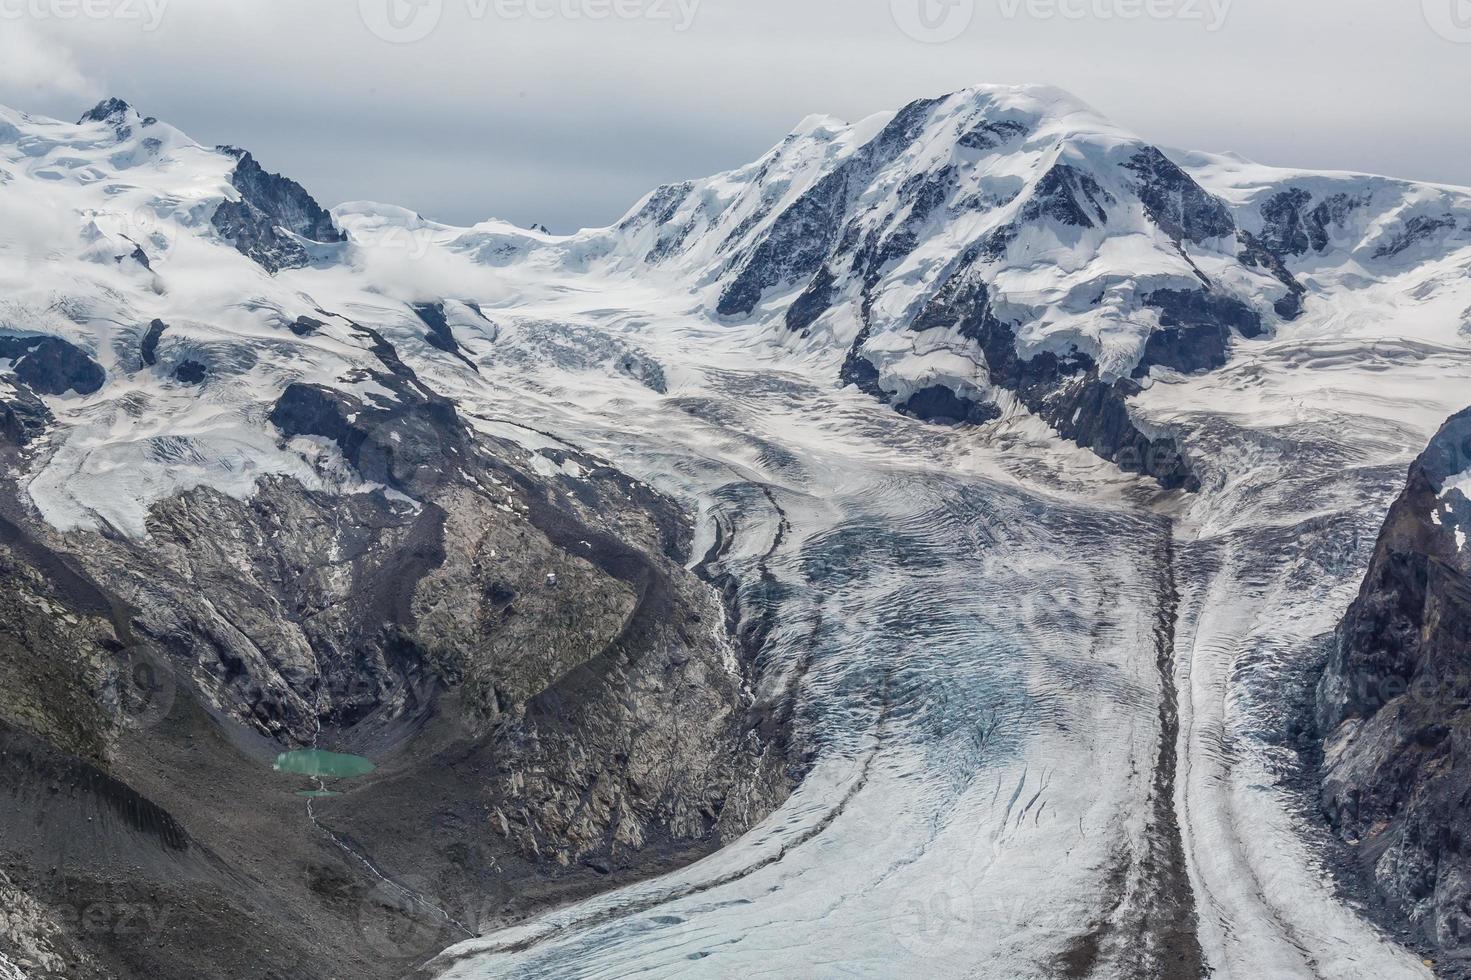 Aerial view of the Alps mountains in Switzerland. Glacier photo